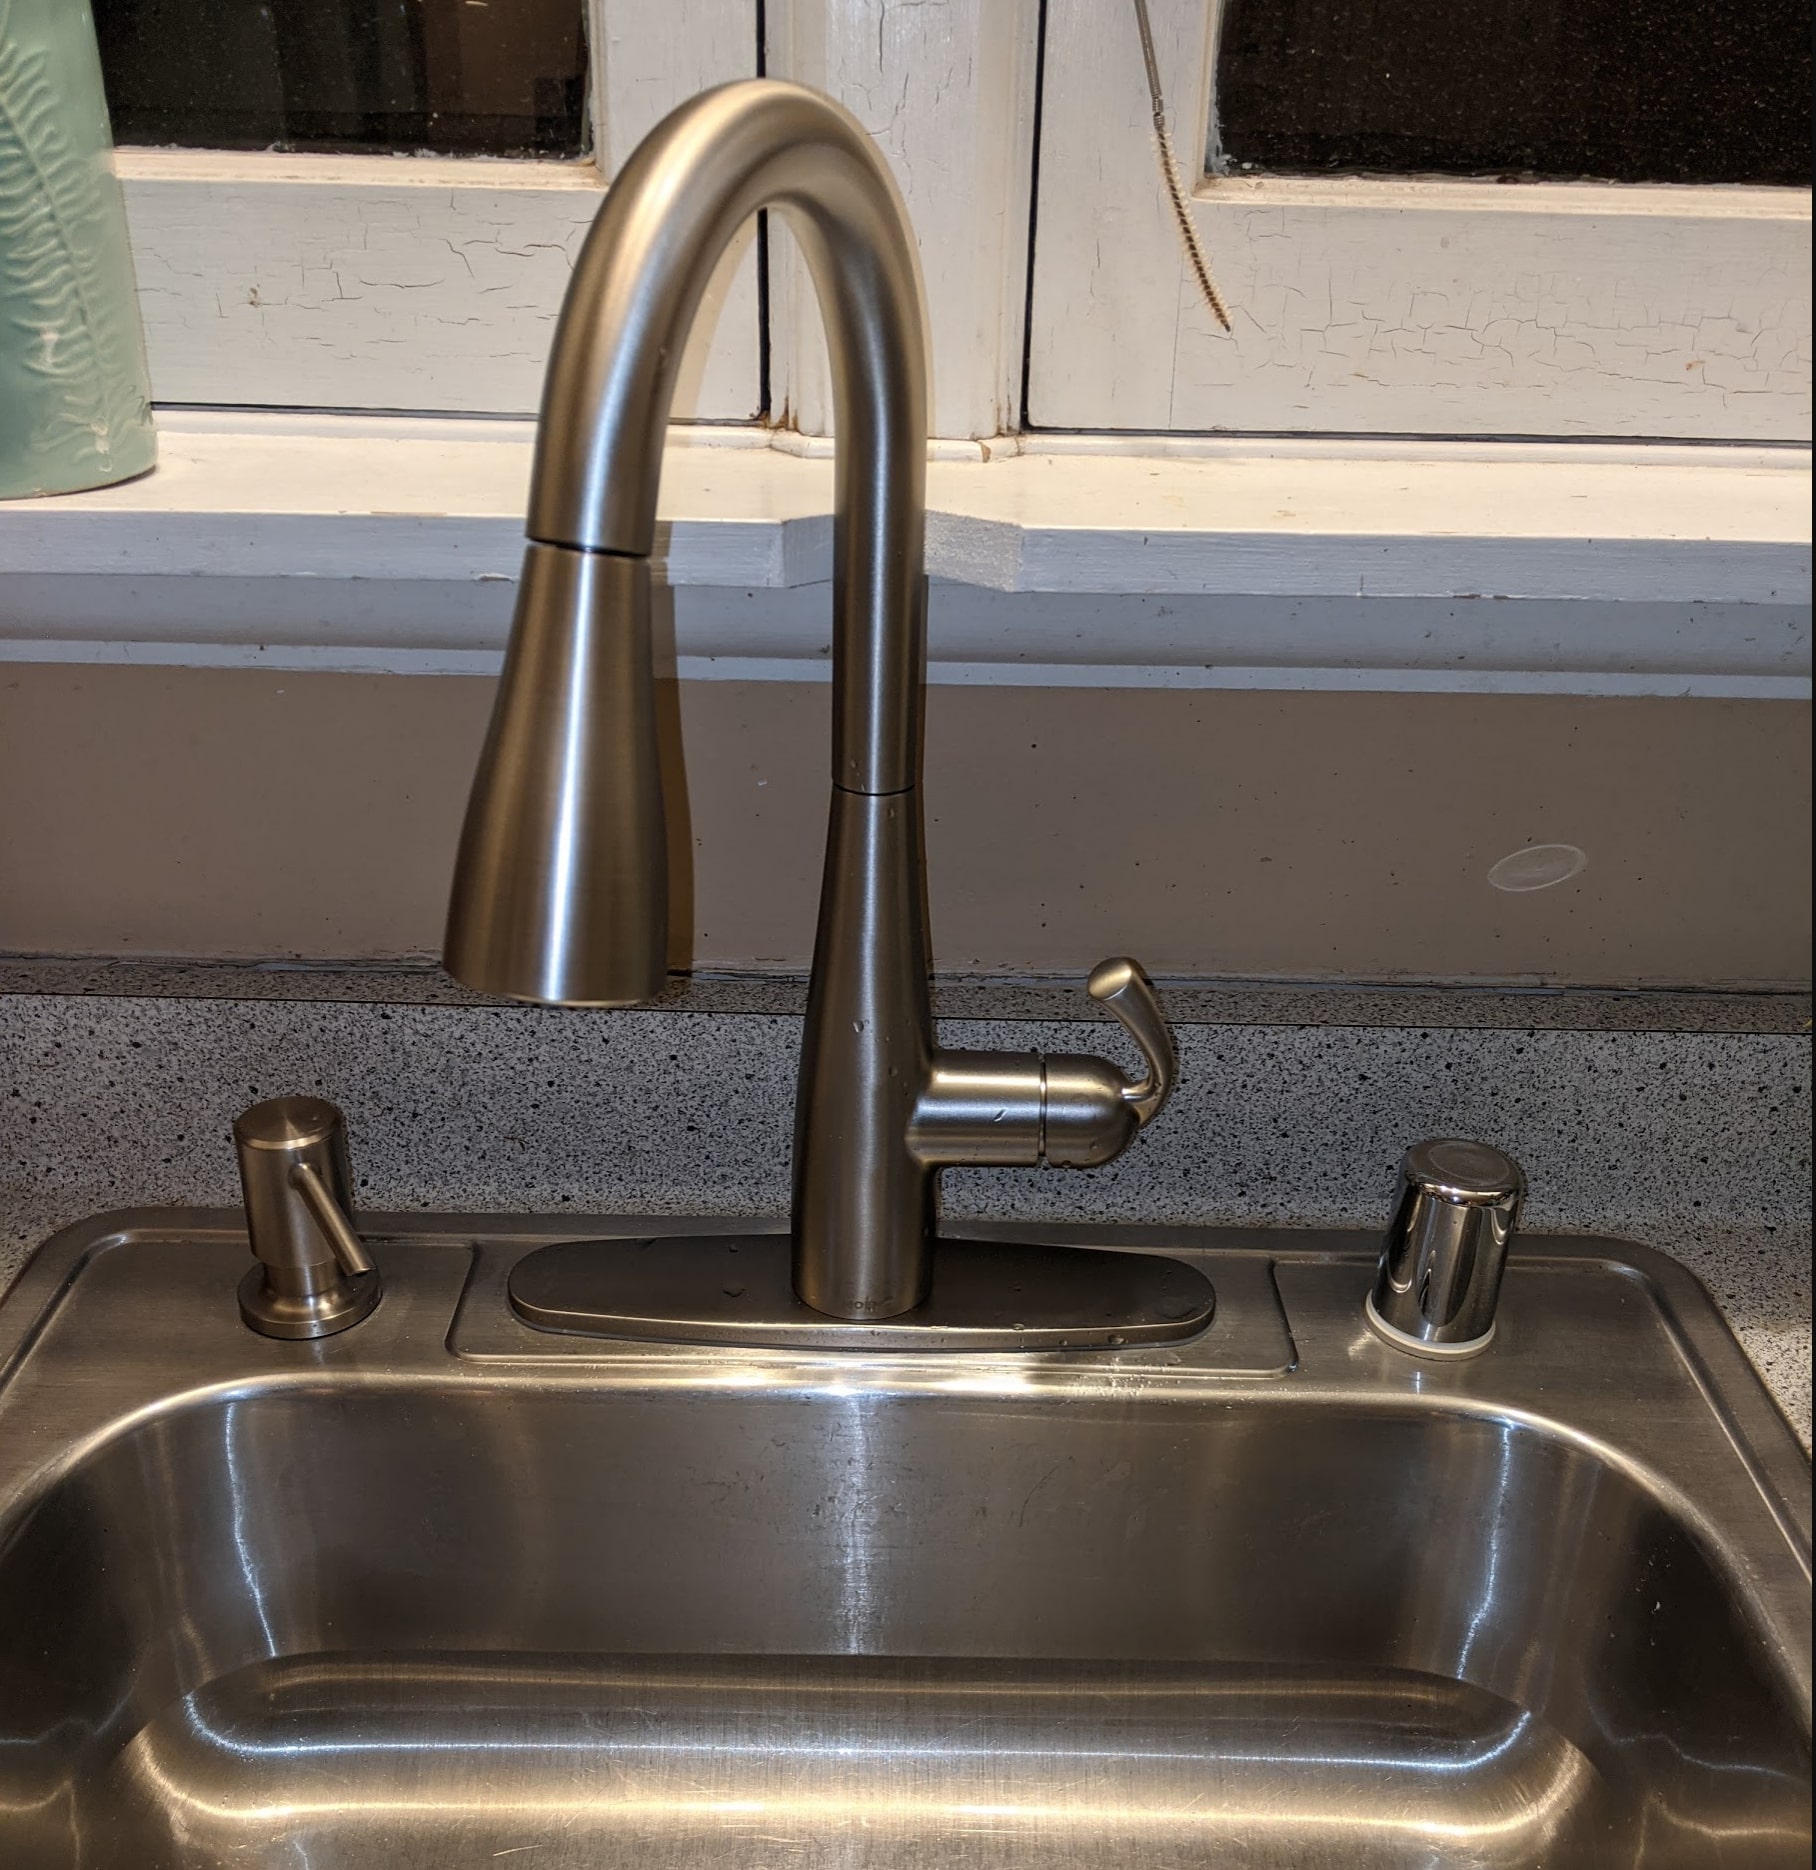 A shiny new kitchen faucet installed in an old kitchen.